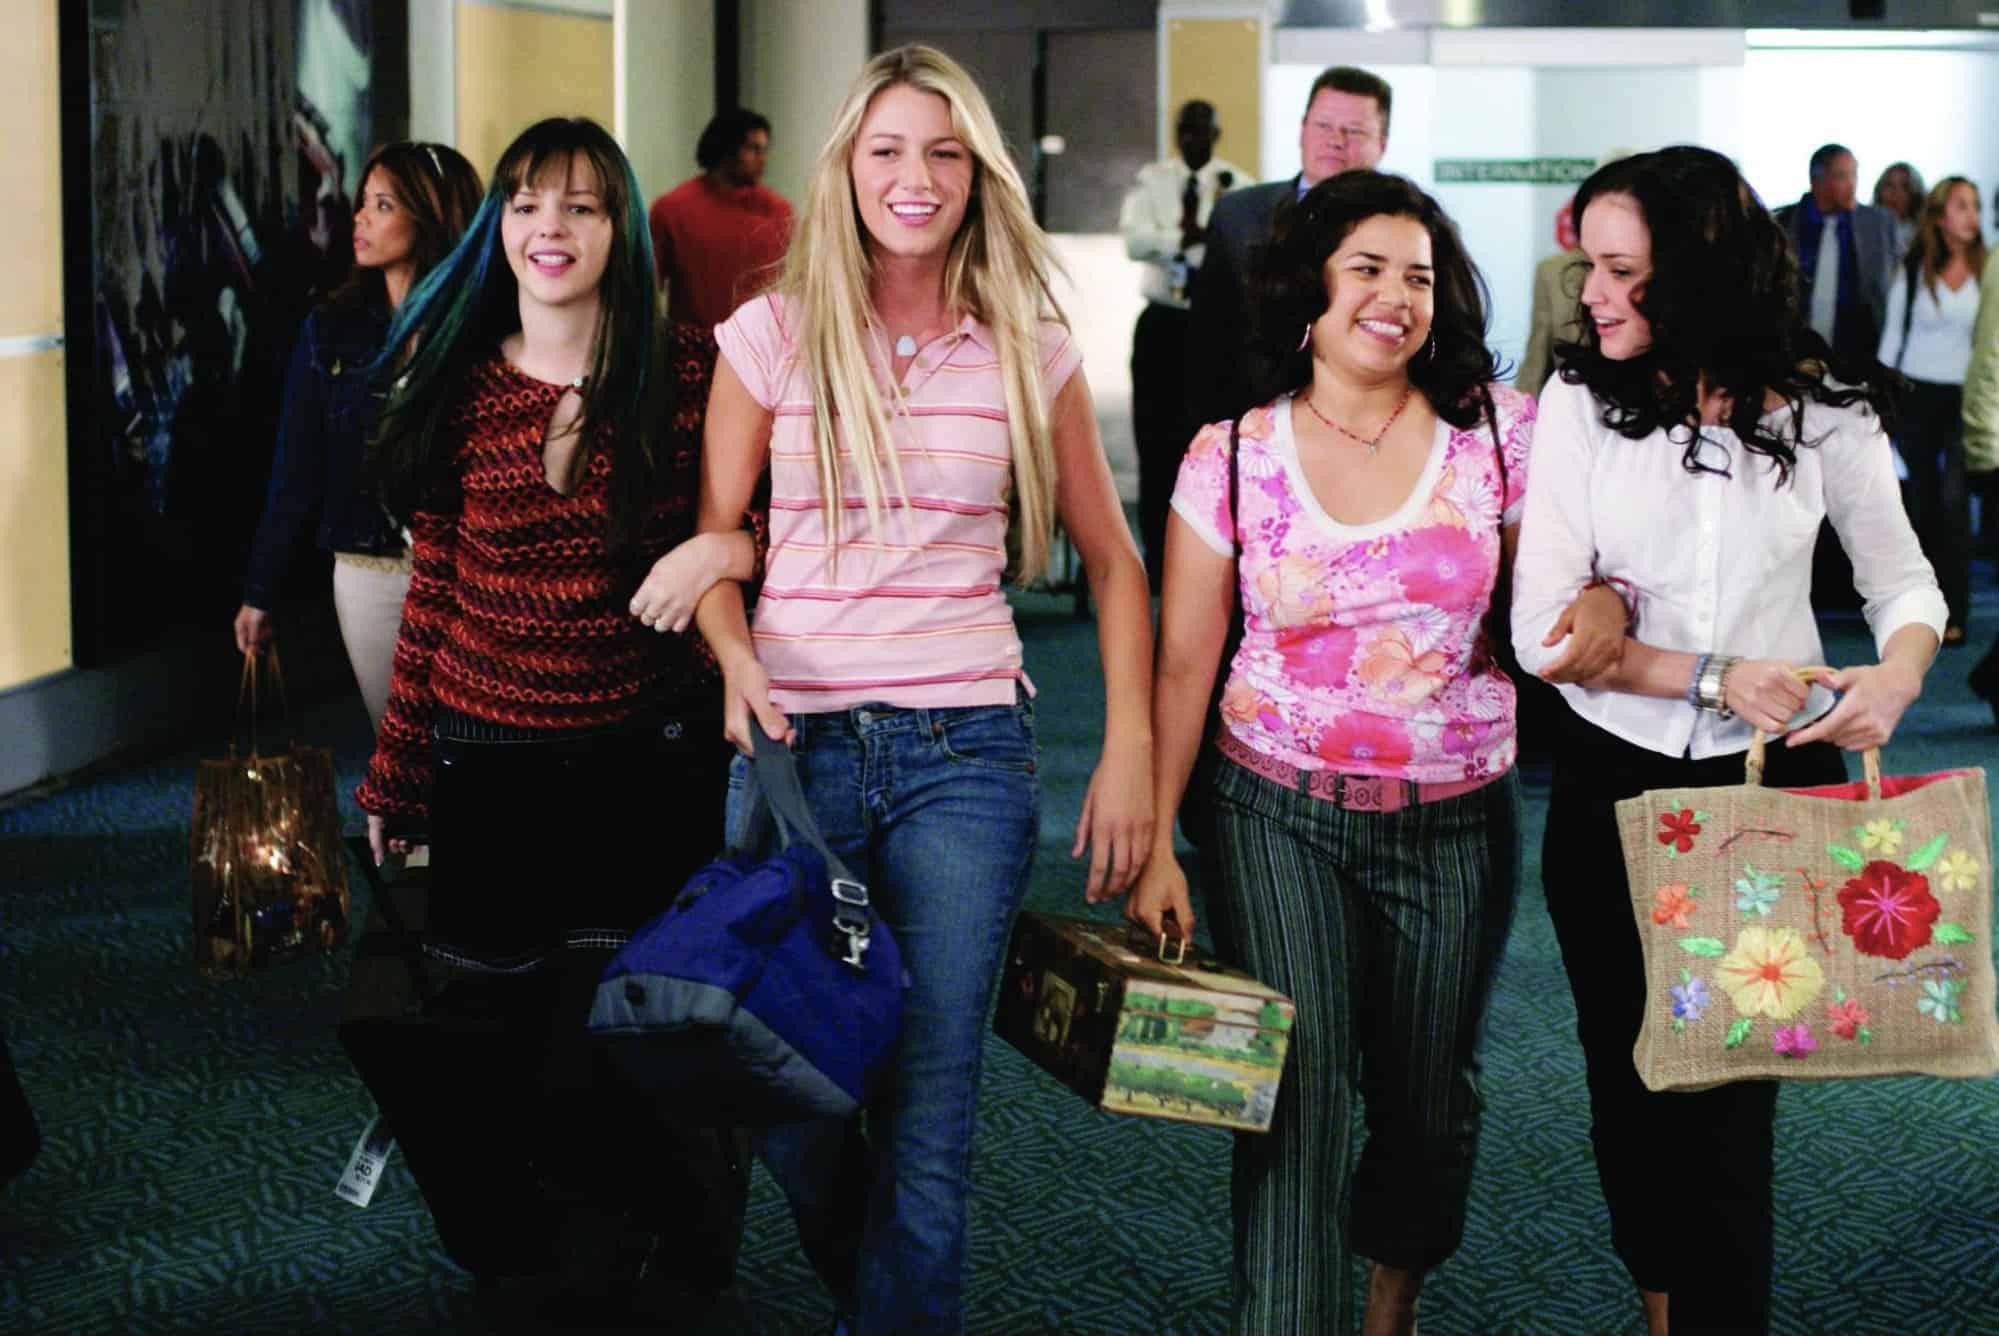  Four girls link arms in an airport in this image from Alcon Entertainment.